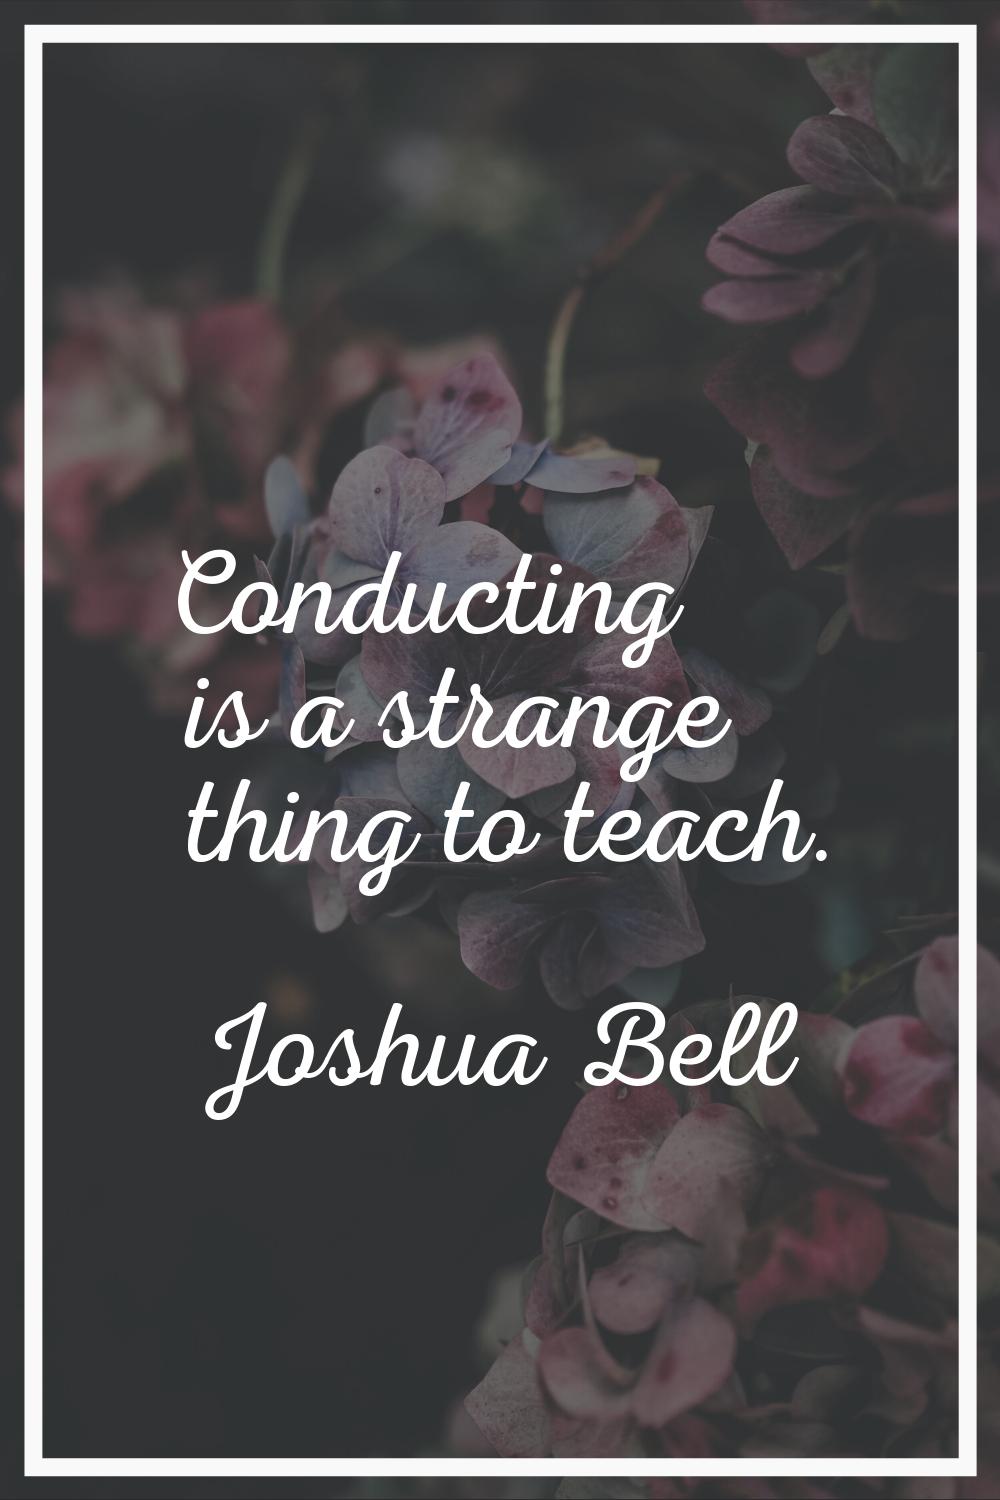 Conducting is a strange thing to teach.